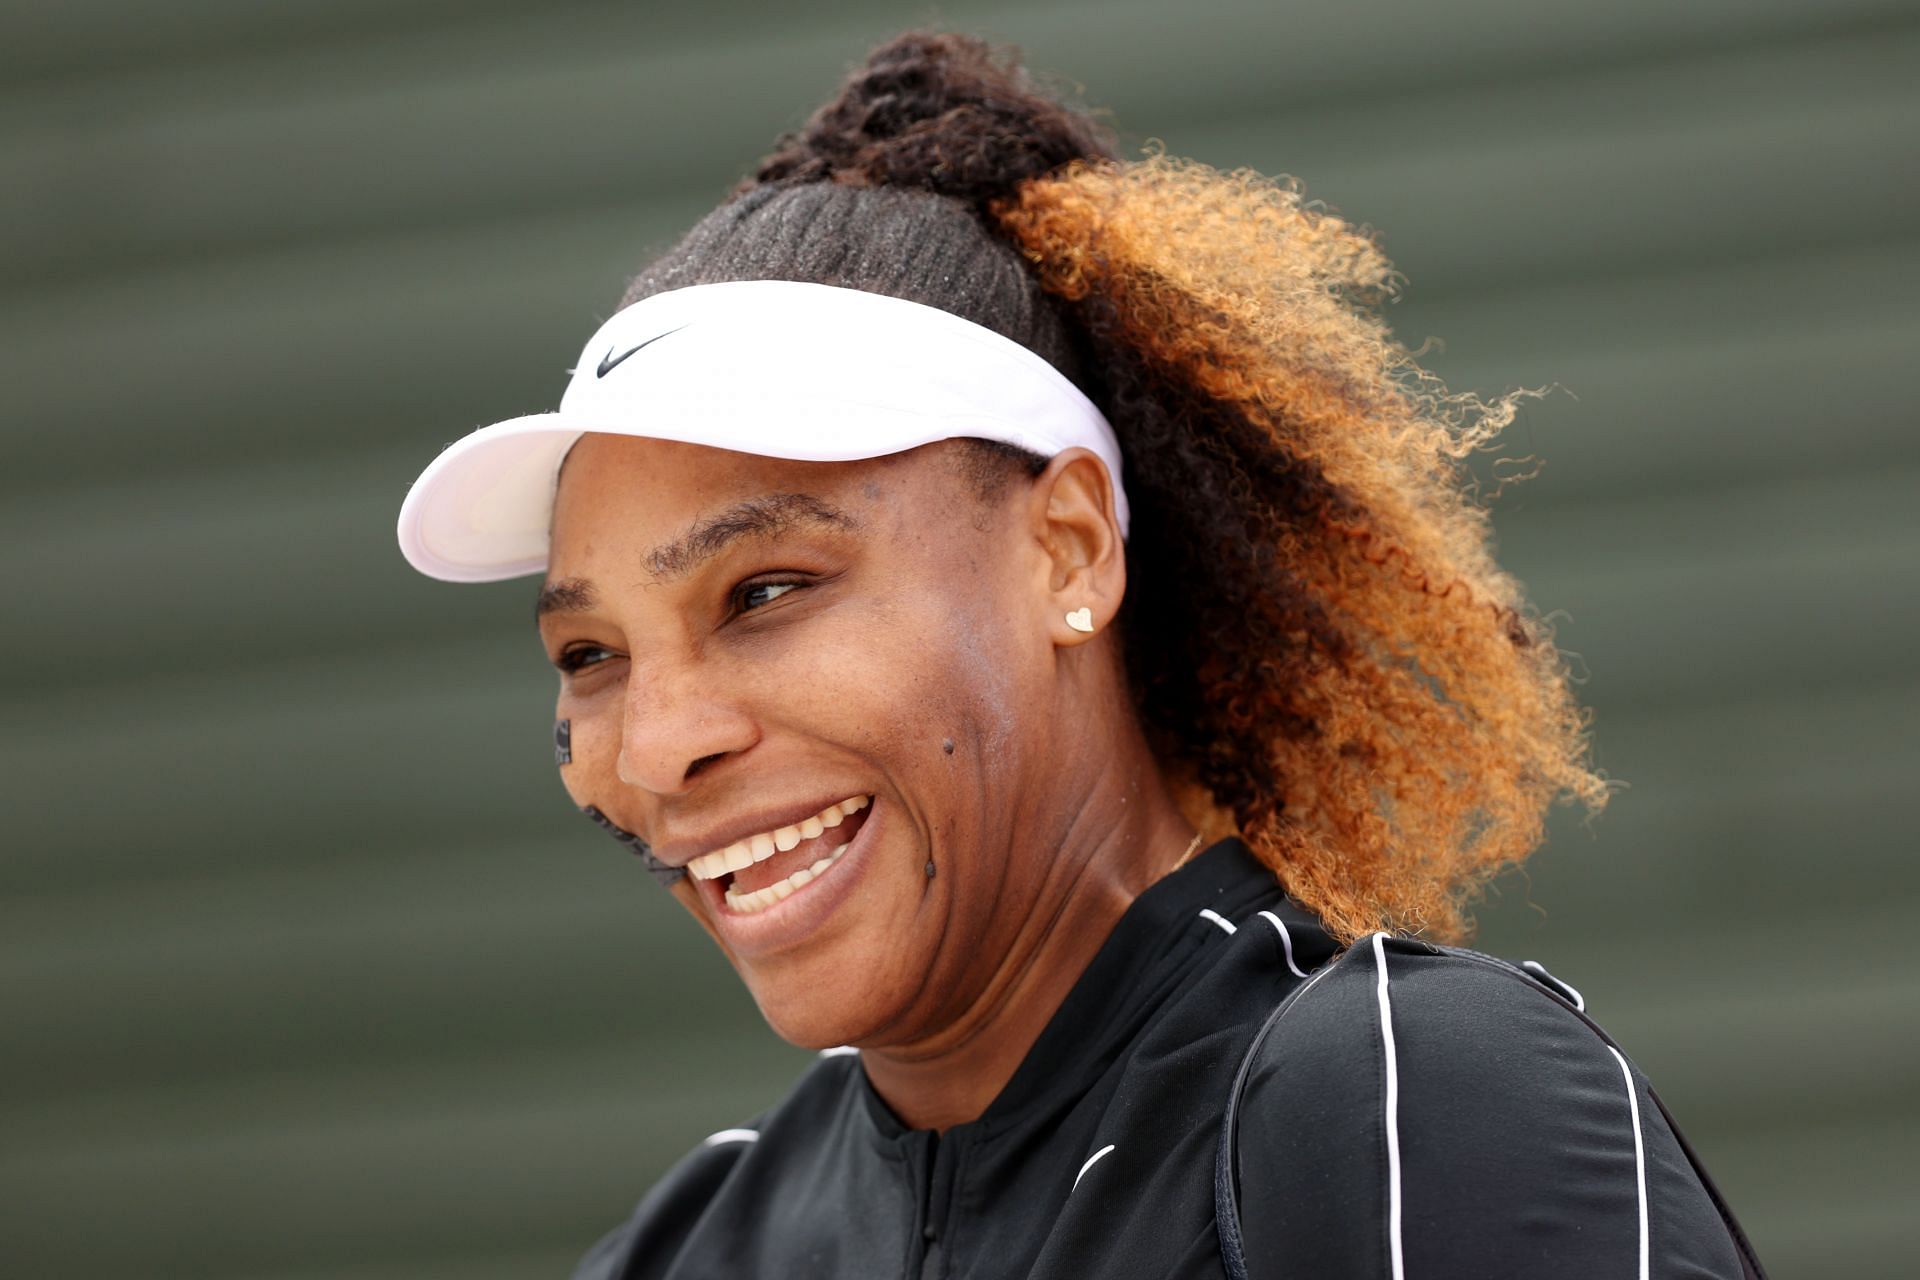 Serena Williams smiles during a training session ahead of the 2022 Wimbledon Championships